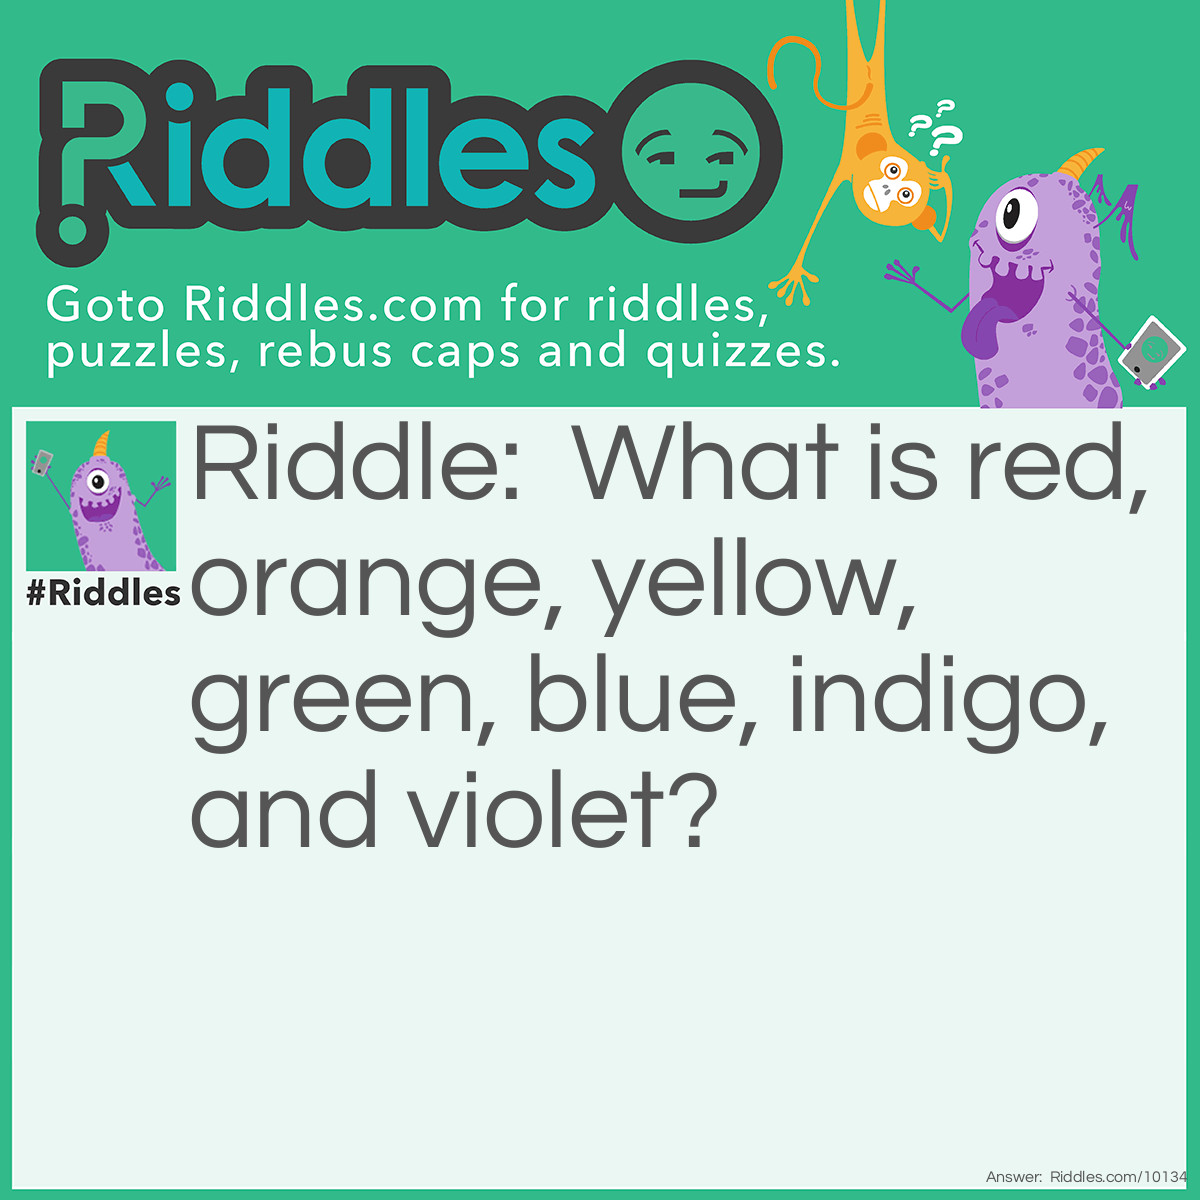 Riddle: What is red, orange, yellow, green, blue, indigo, and violet? Answer: A rainbow.